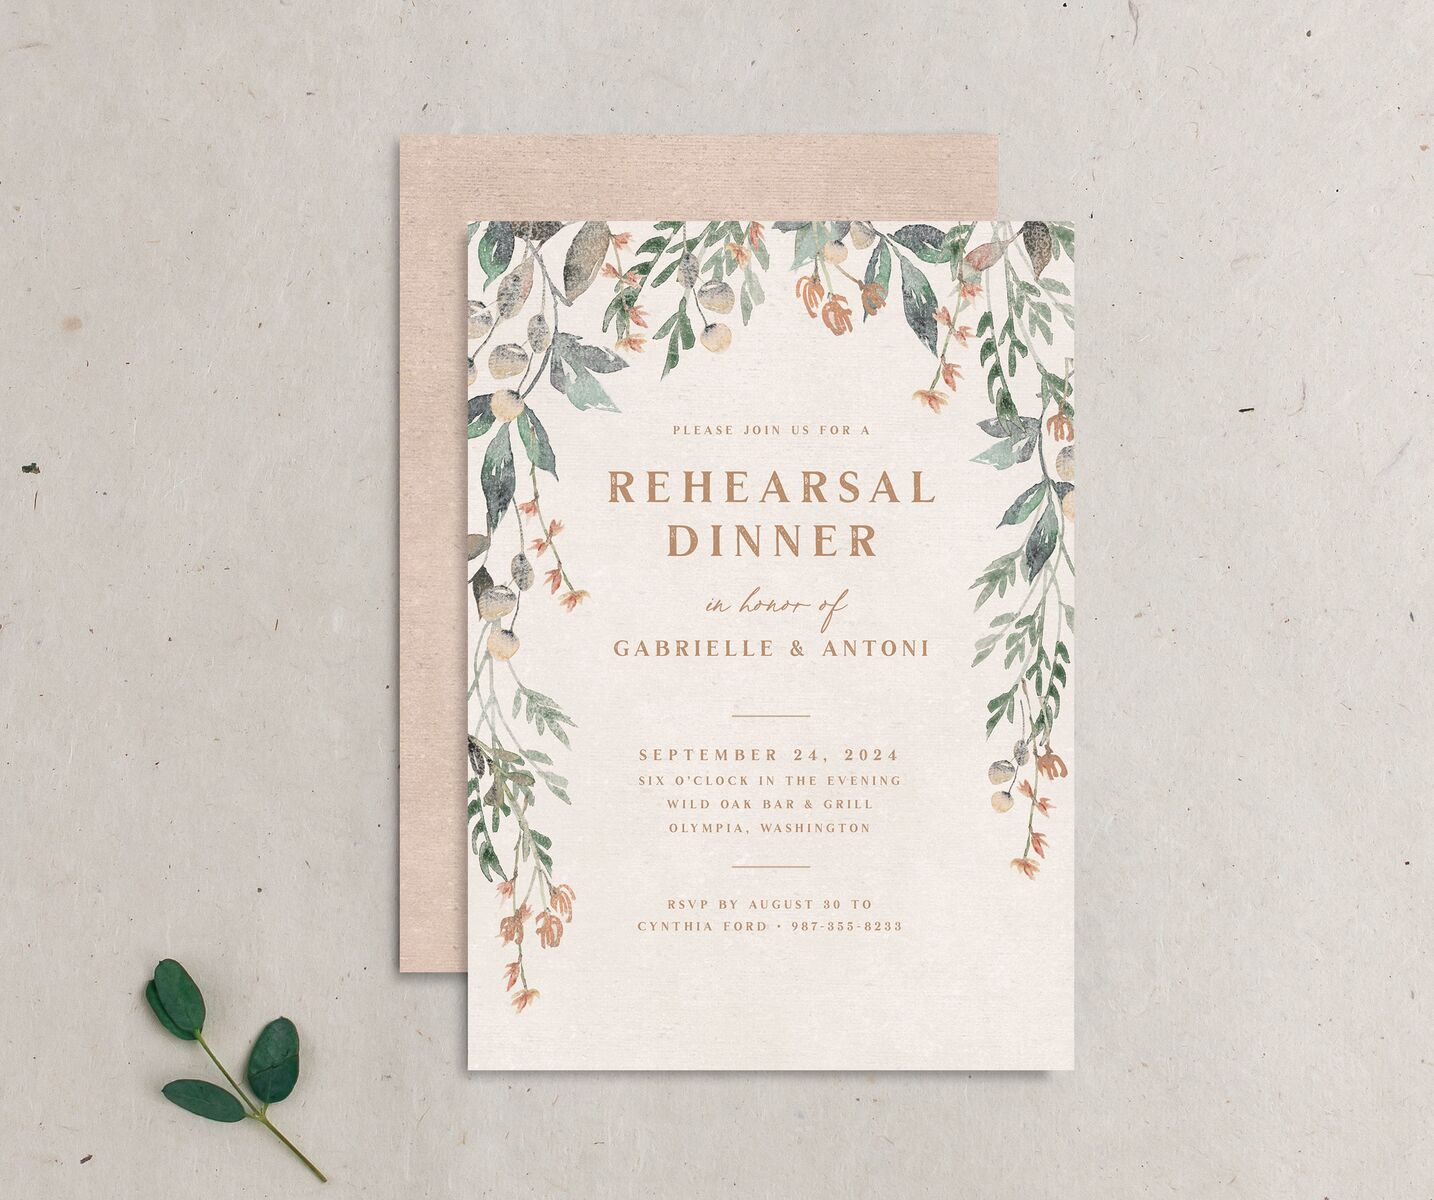 Vintage Vineyard Rehearsal Dinner Invitations front-and-back in cream